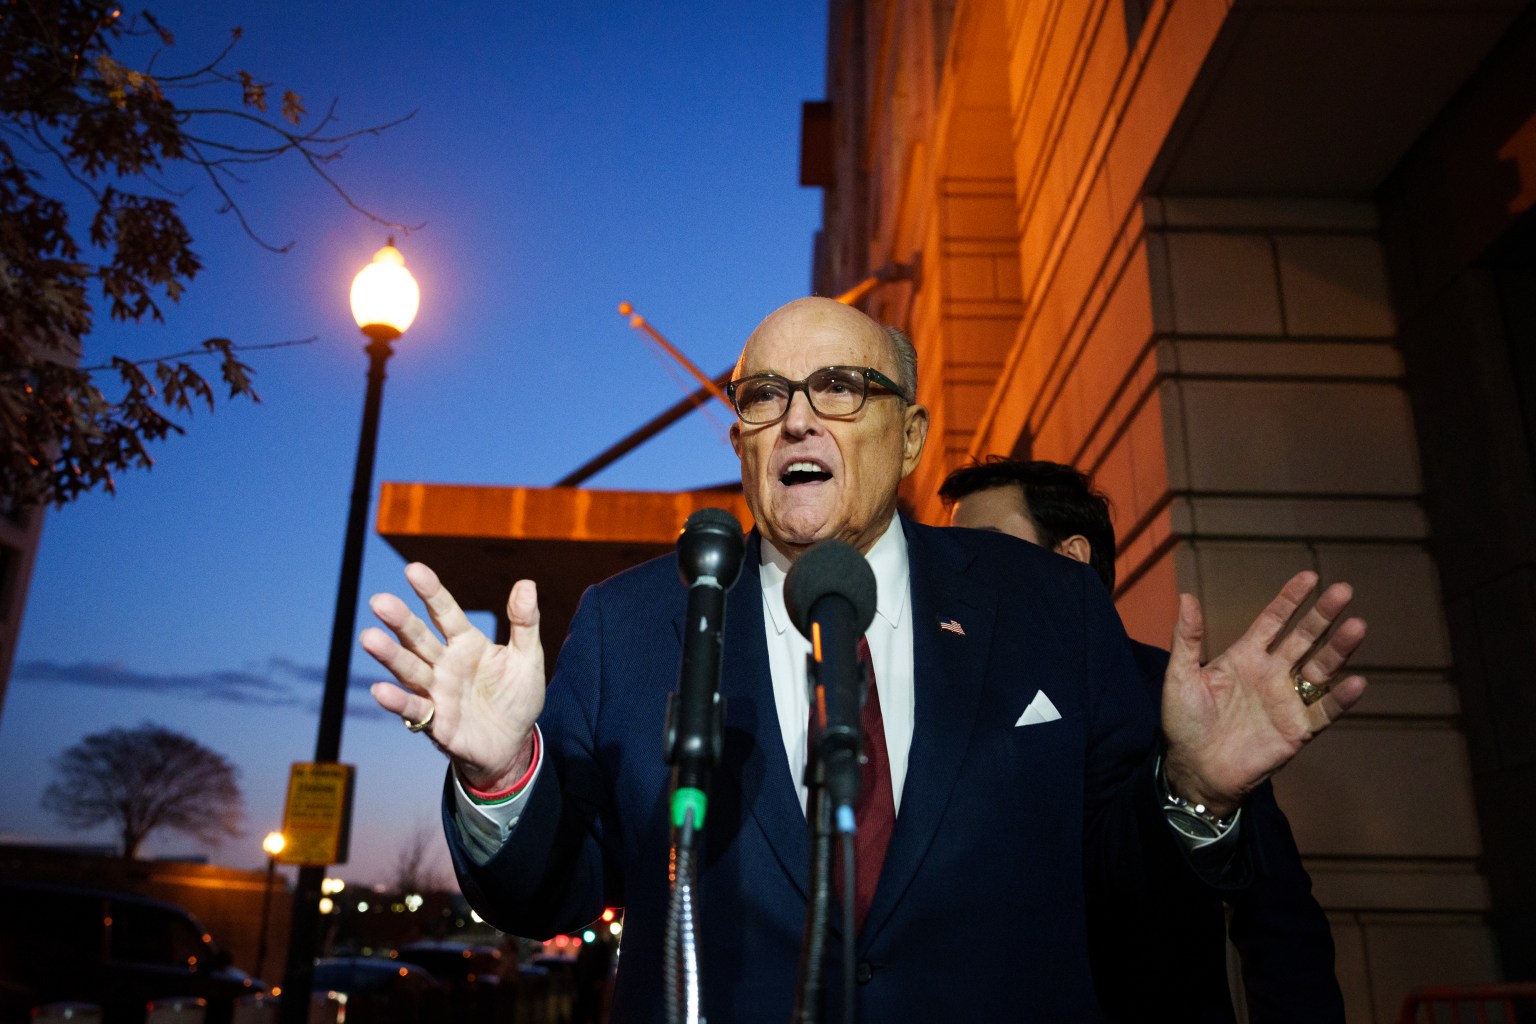 $148 MillionJury Holds Rudolph Giuliani Liable for Defaming Election Workers Ruby Freeman and Shaye Moss, Awards Waaaaay More Than Requested (talkingpointsmemo.com)